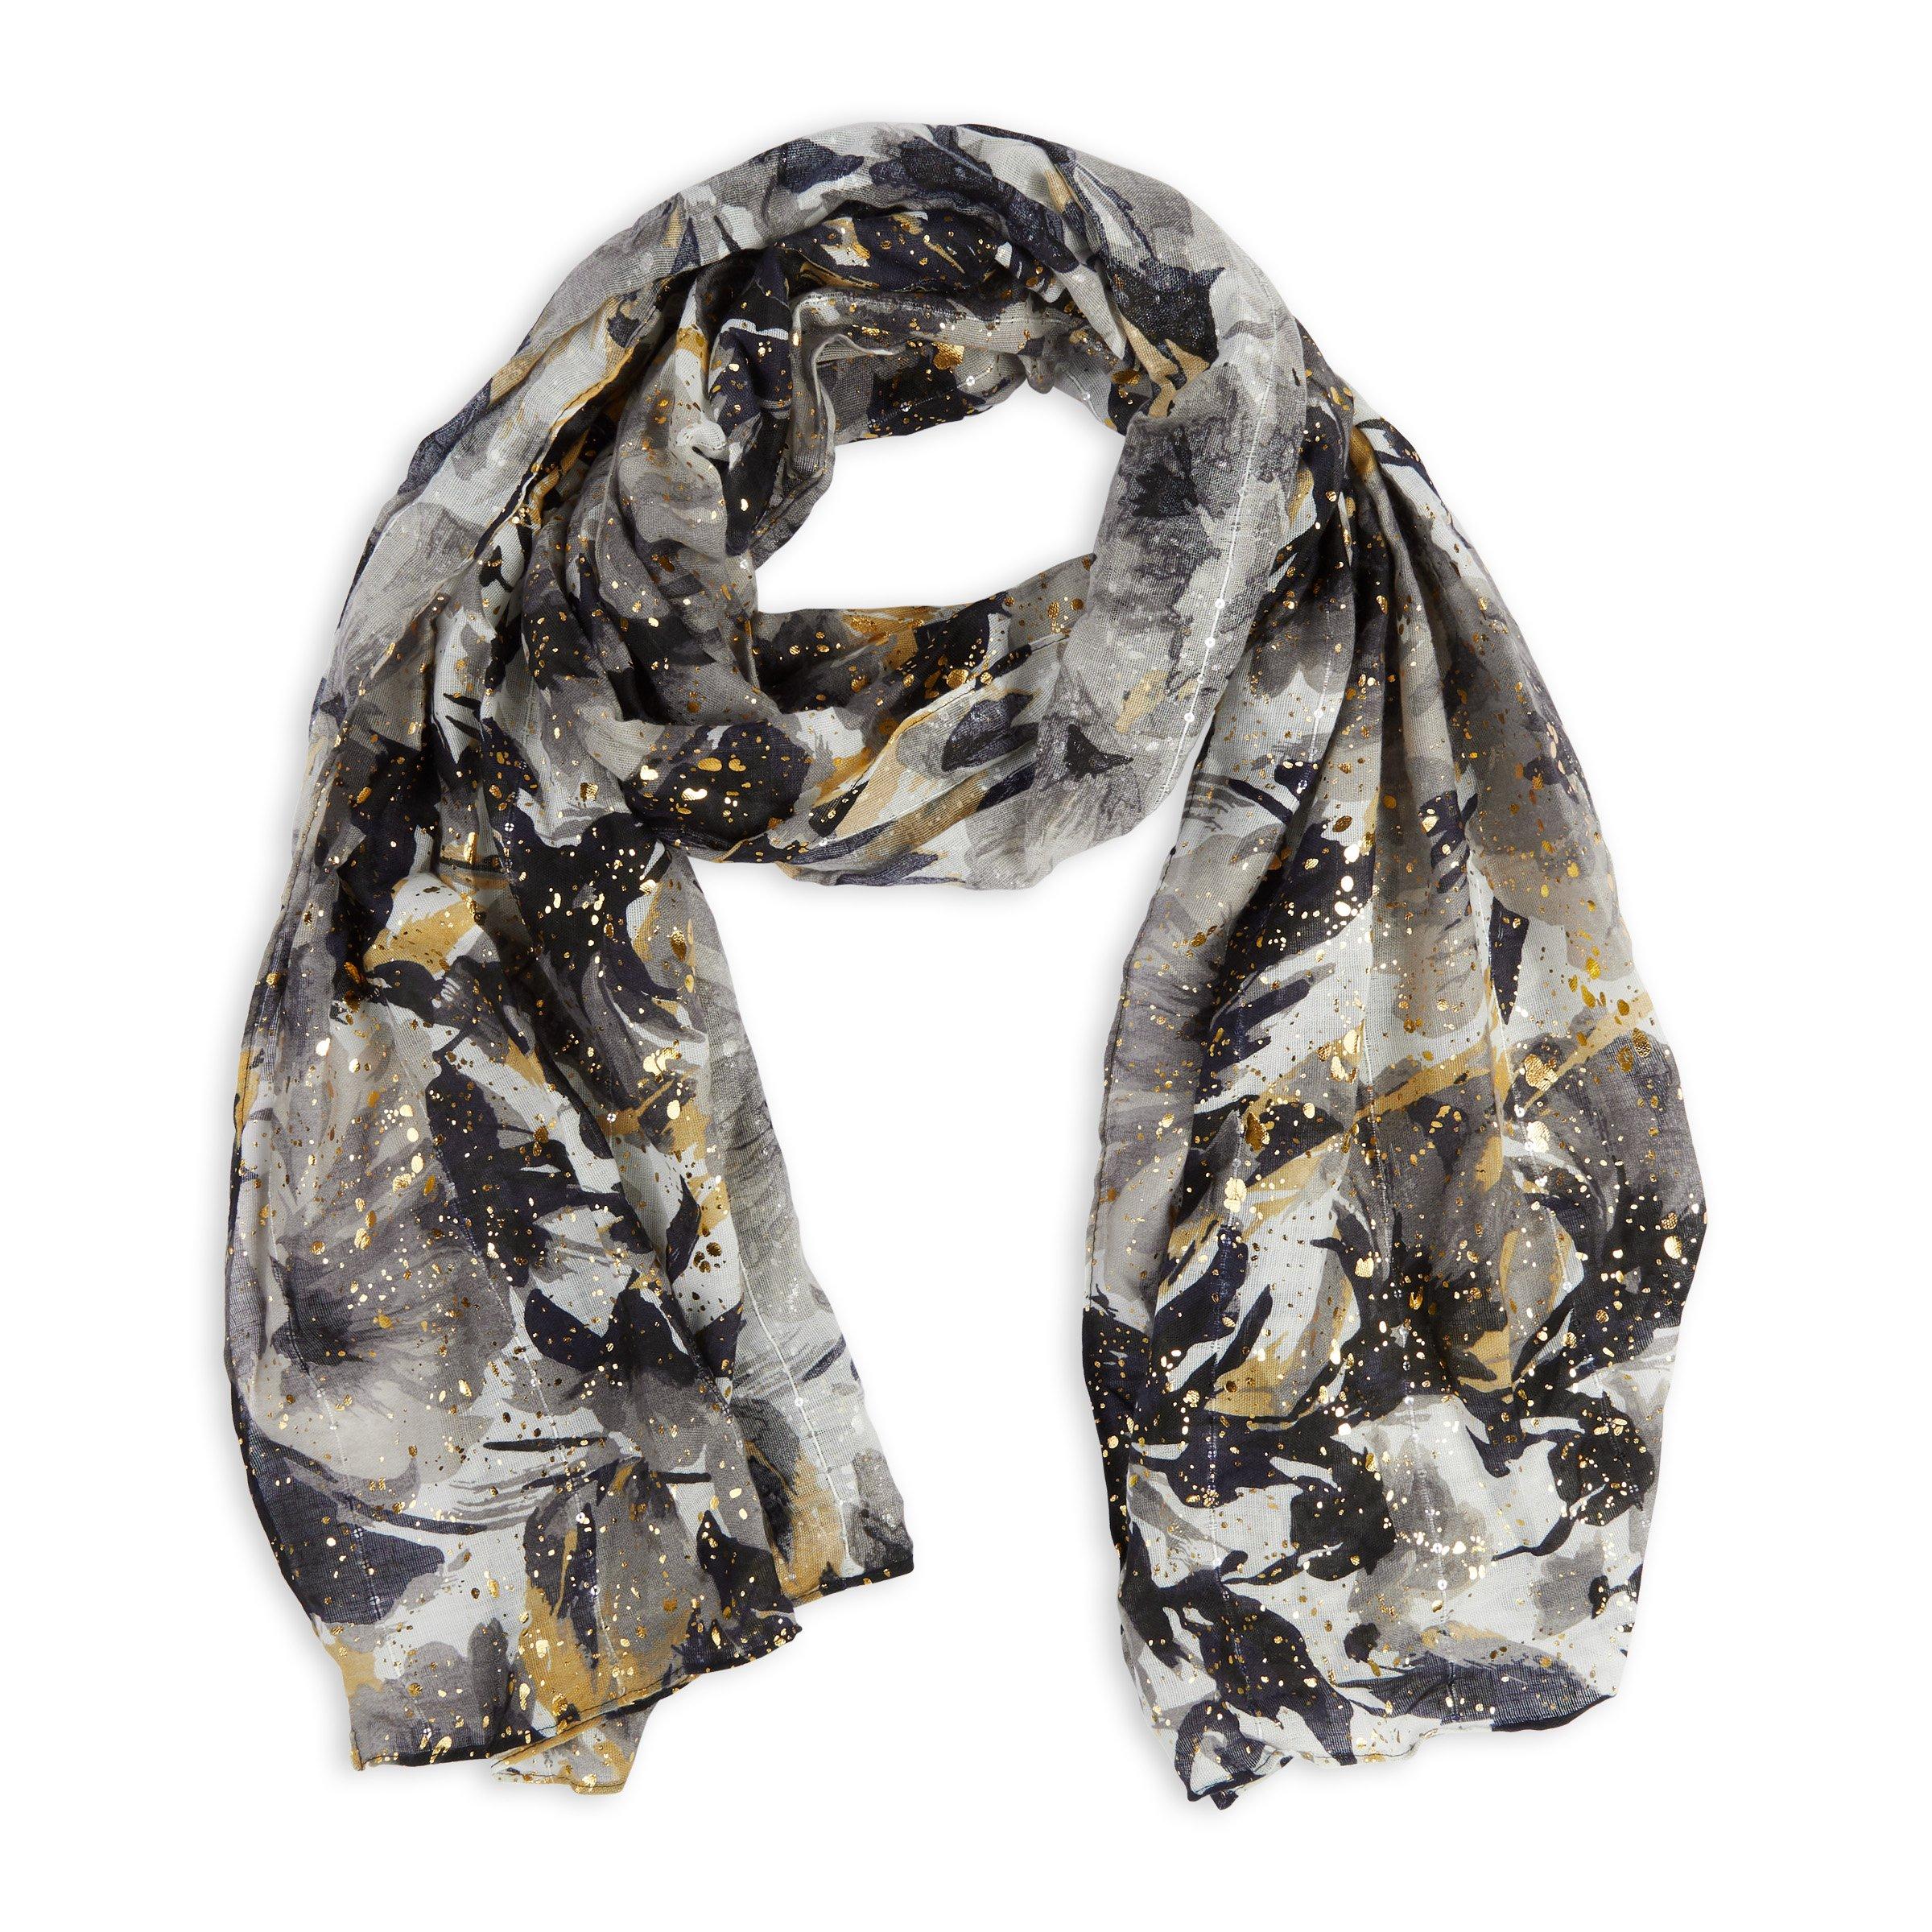 The Abstract Print Scarf